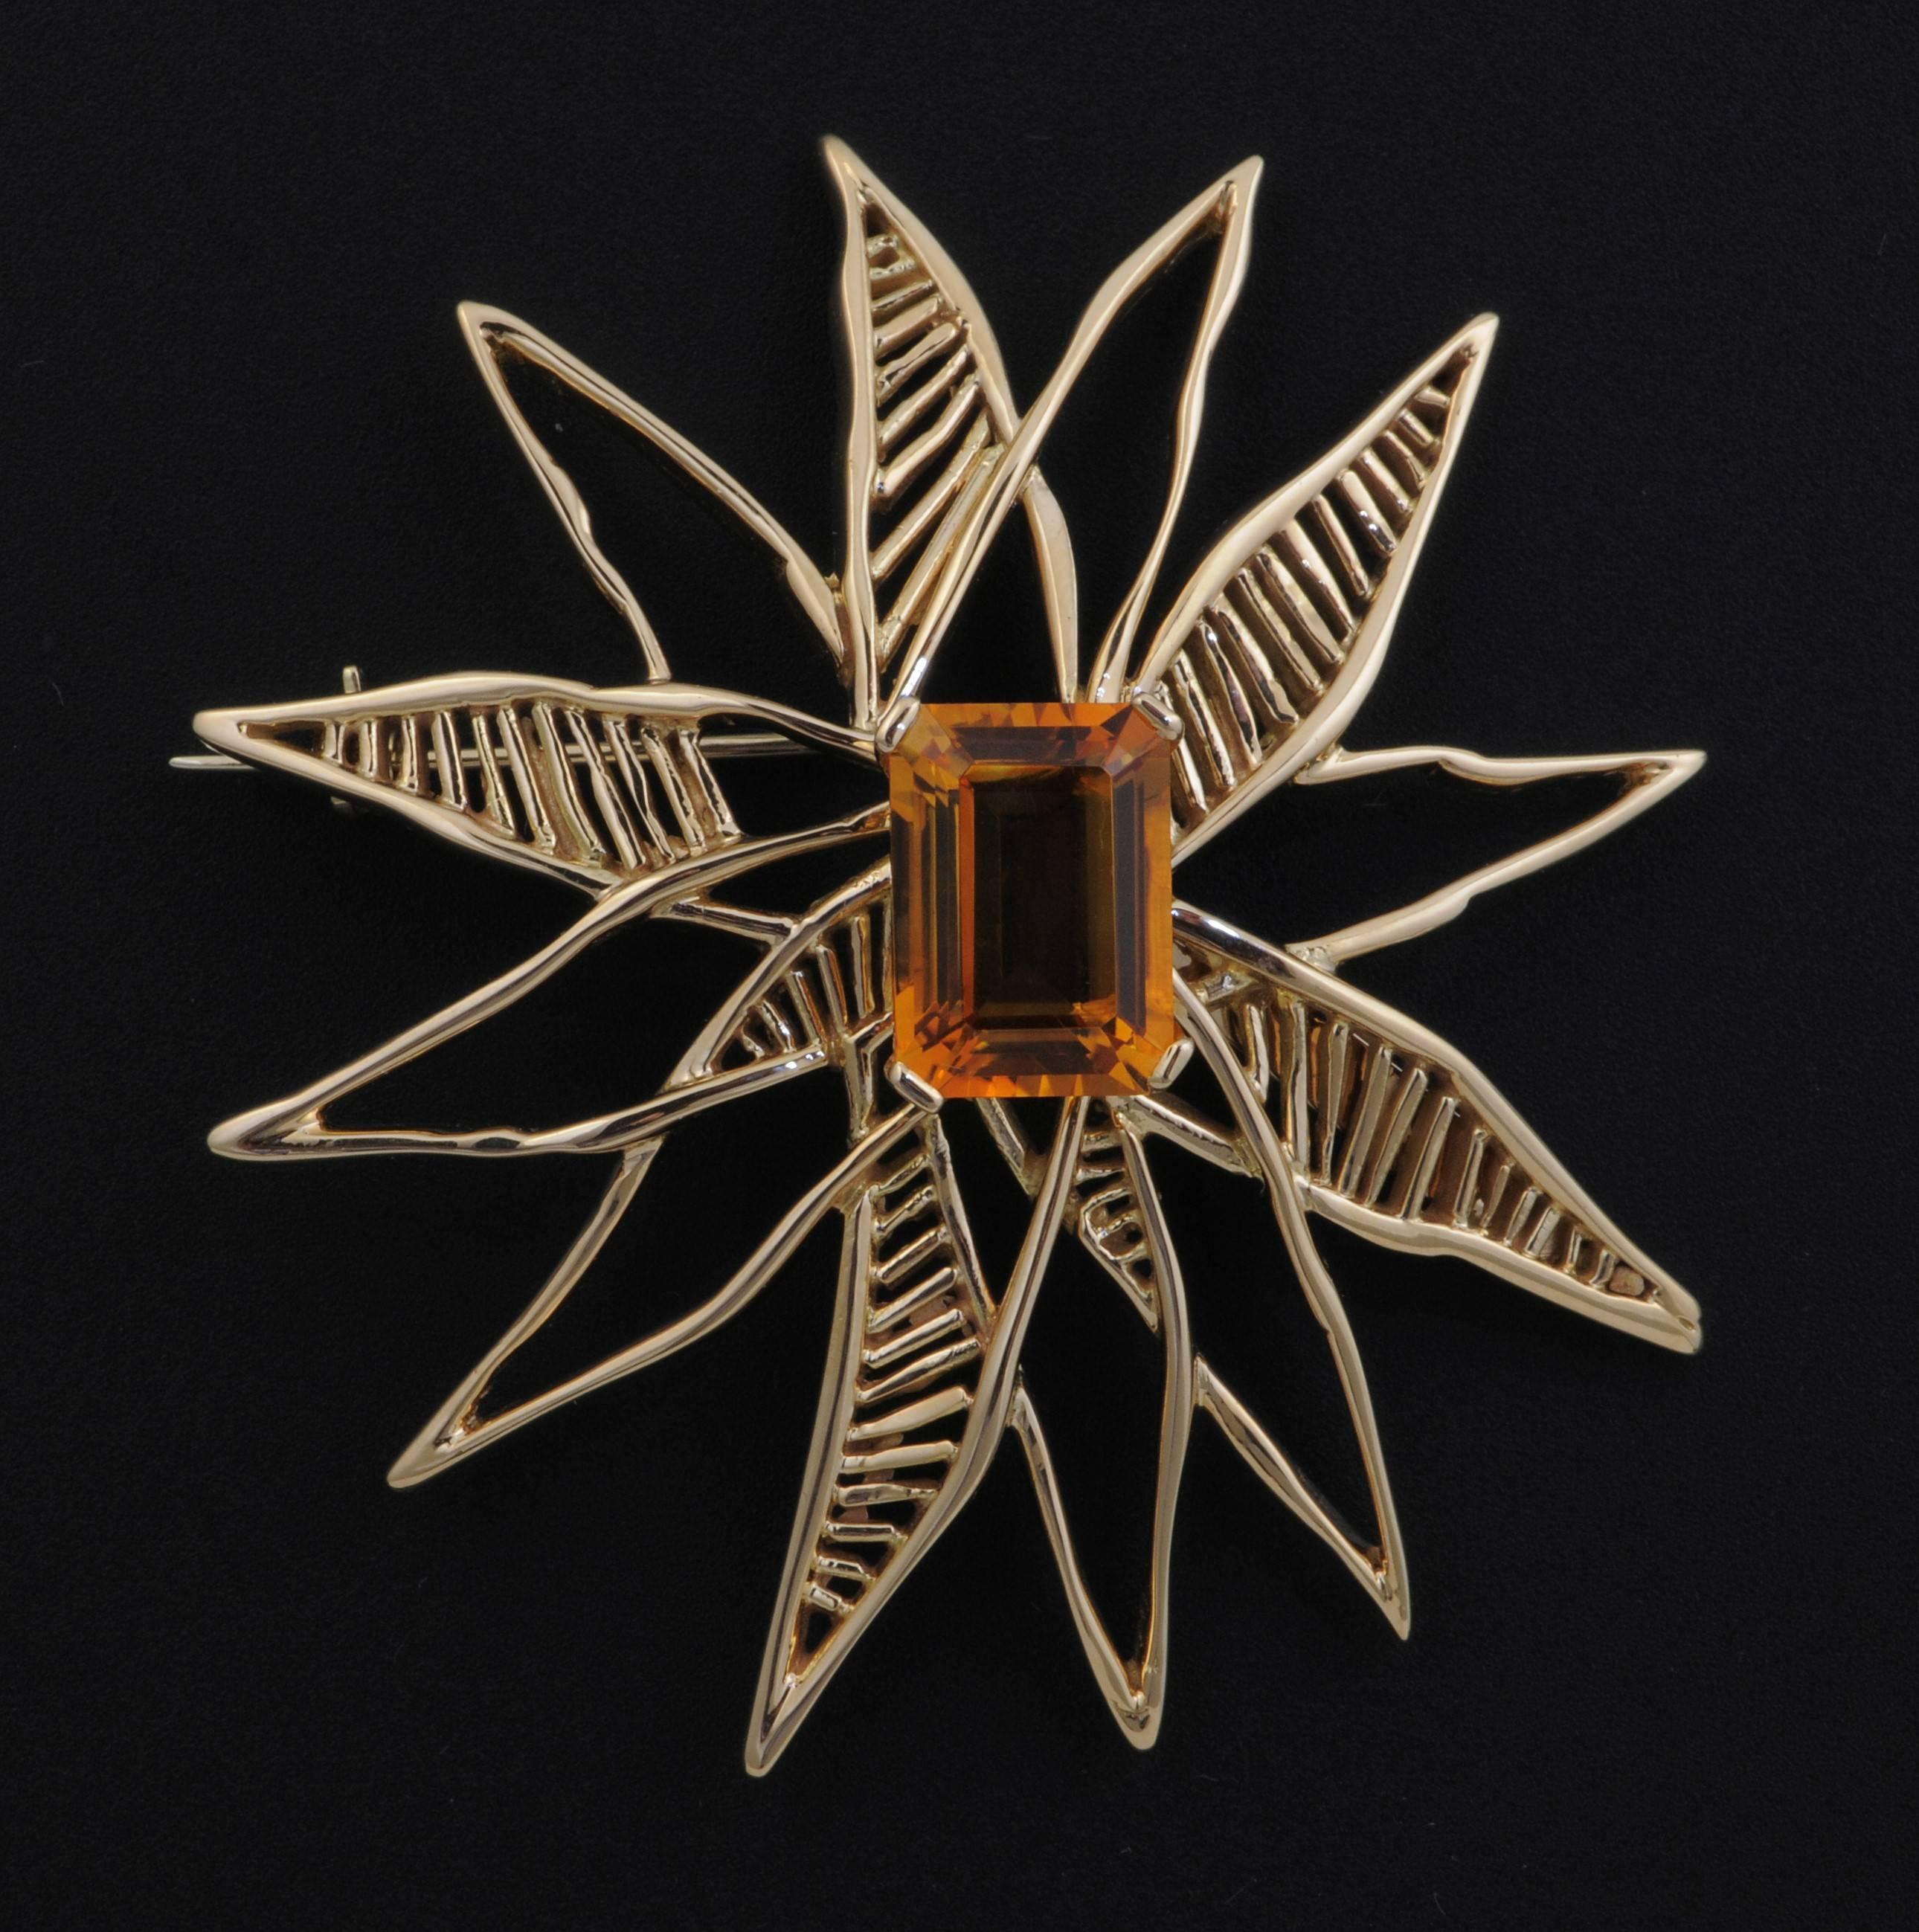 Express Shipping insured during the Lockdown

Fine 18K Gold (Marked) & Citrine (7 cts) Brooch by Georges Braque (1882-1963), inventor of cubism.
The piece is called 